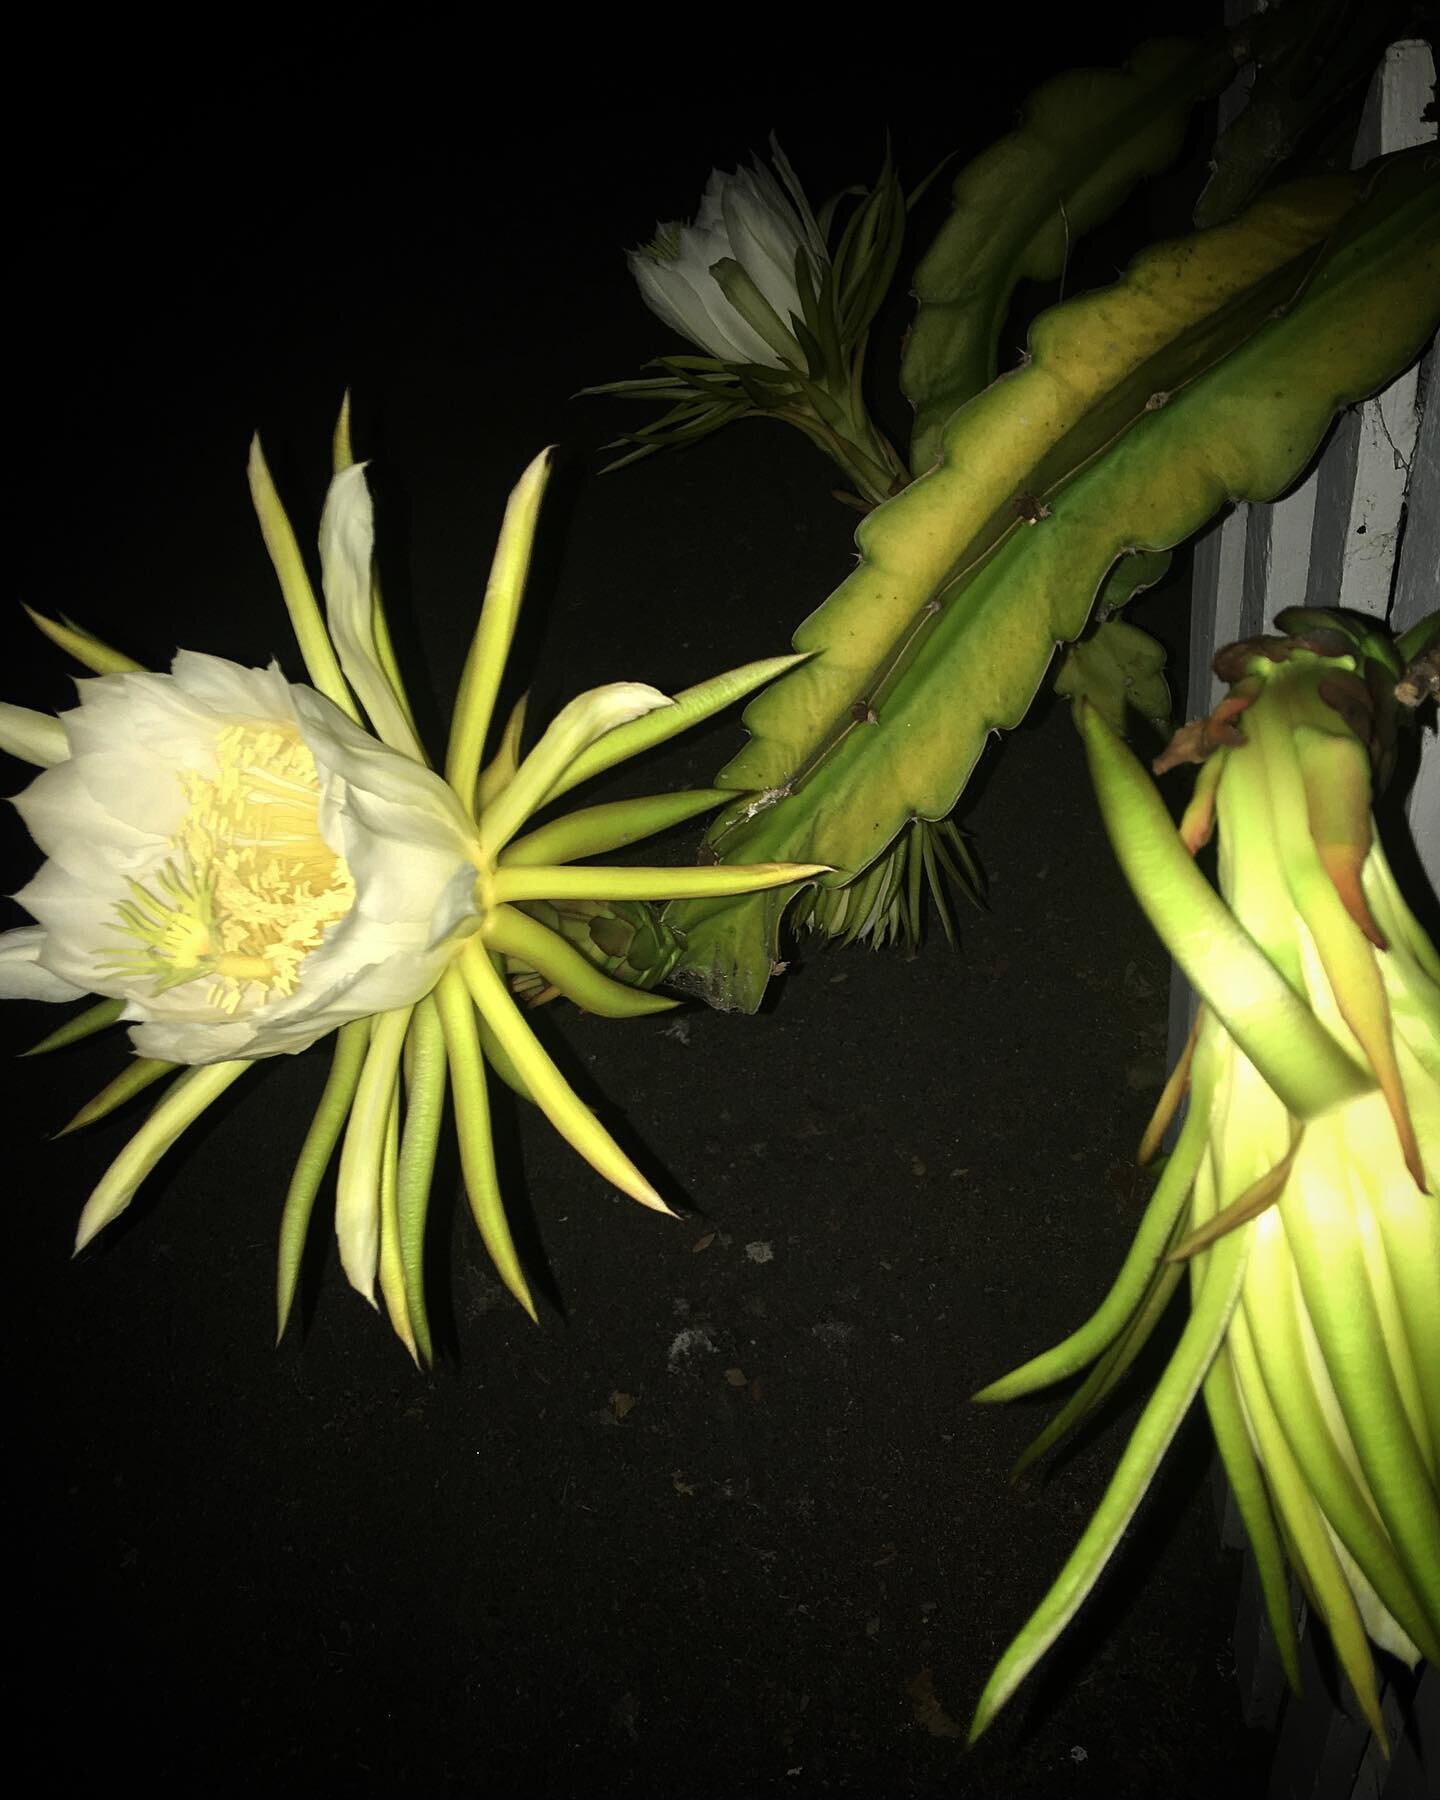 In our back alley, These amazing cactus flowers are growing and bloom only at night! They are called Cereus, The bloom will only open at night for a couple of weeks a year and is pollinated by a moth. The Cereus flower is a large white flower borne o